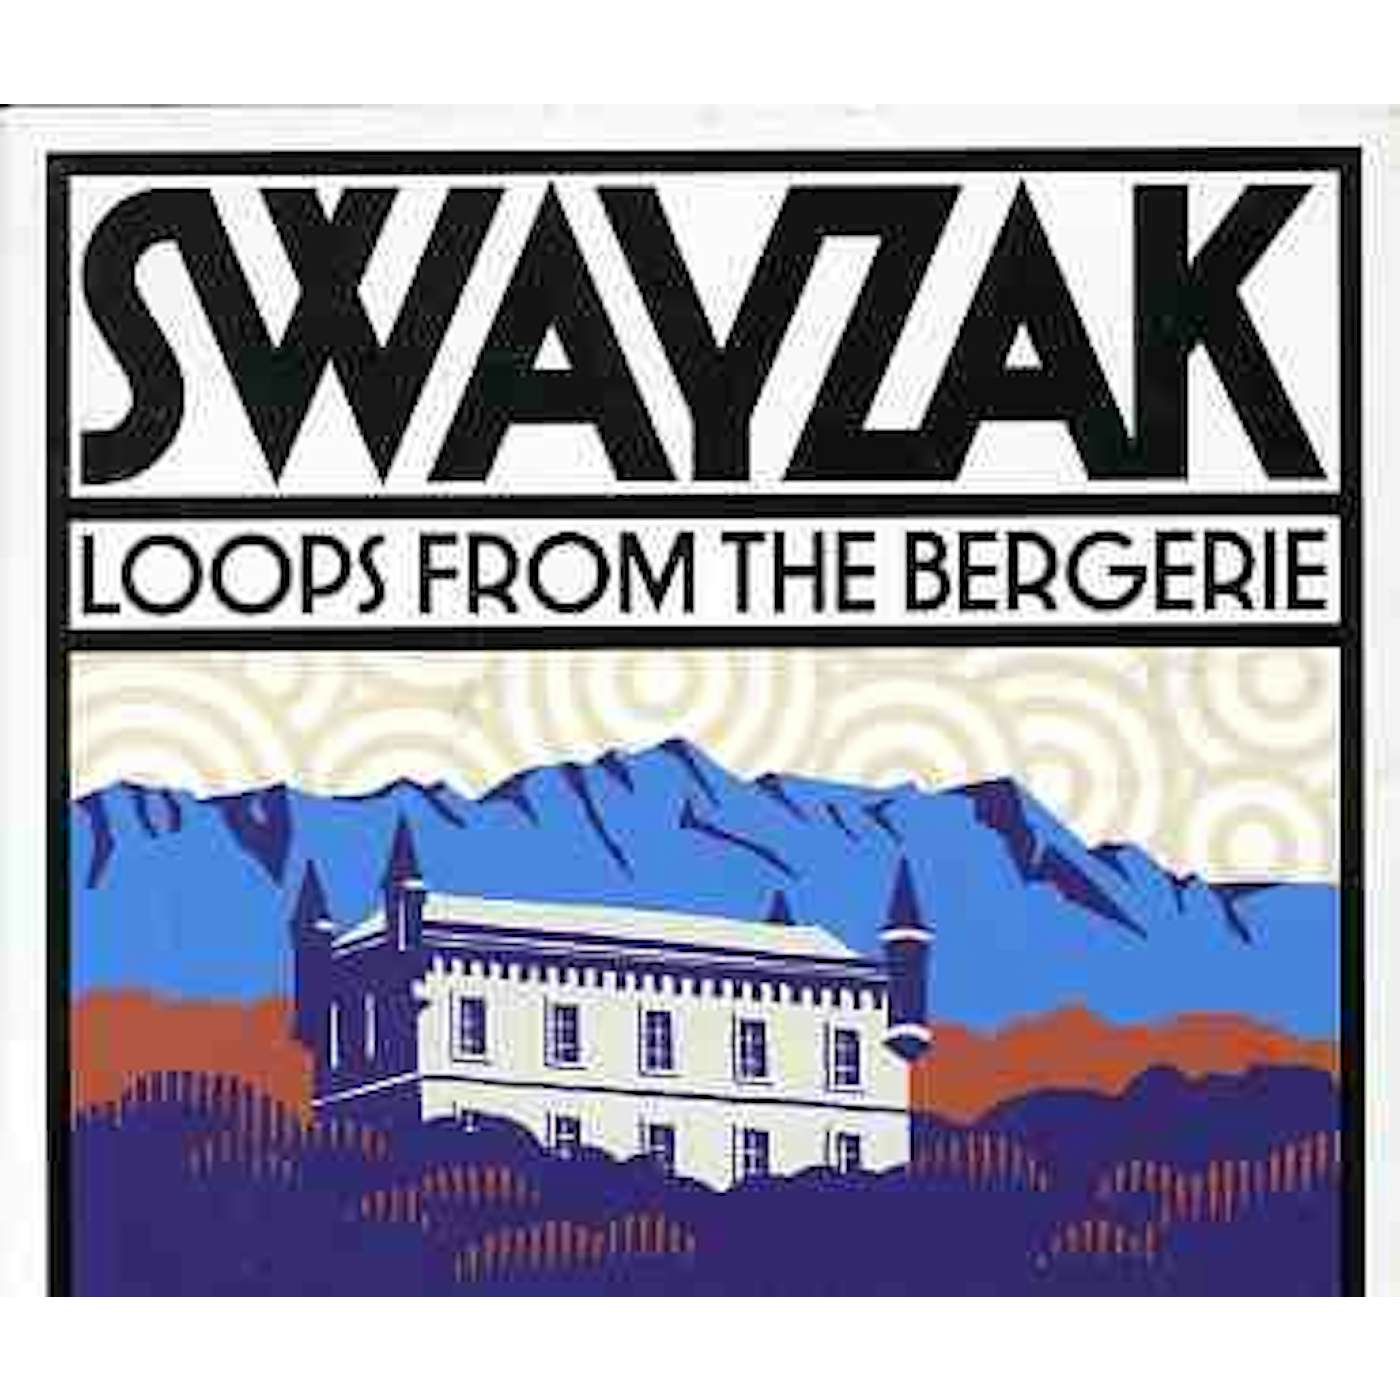 Swayzak LOOPS FROM THE BERGERIE CD